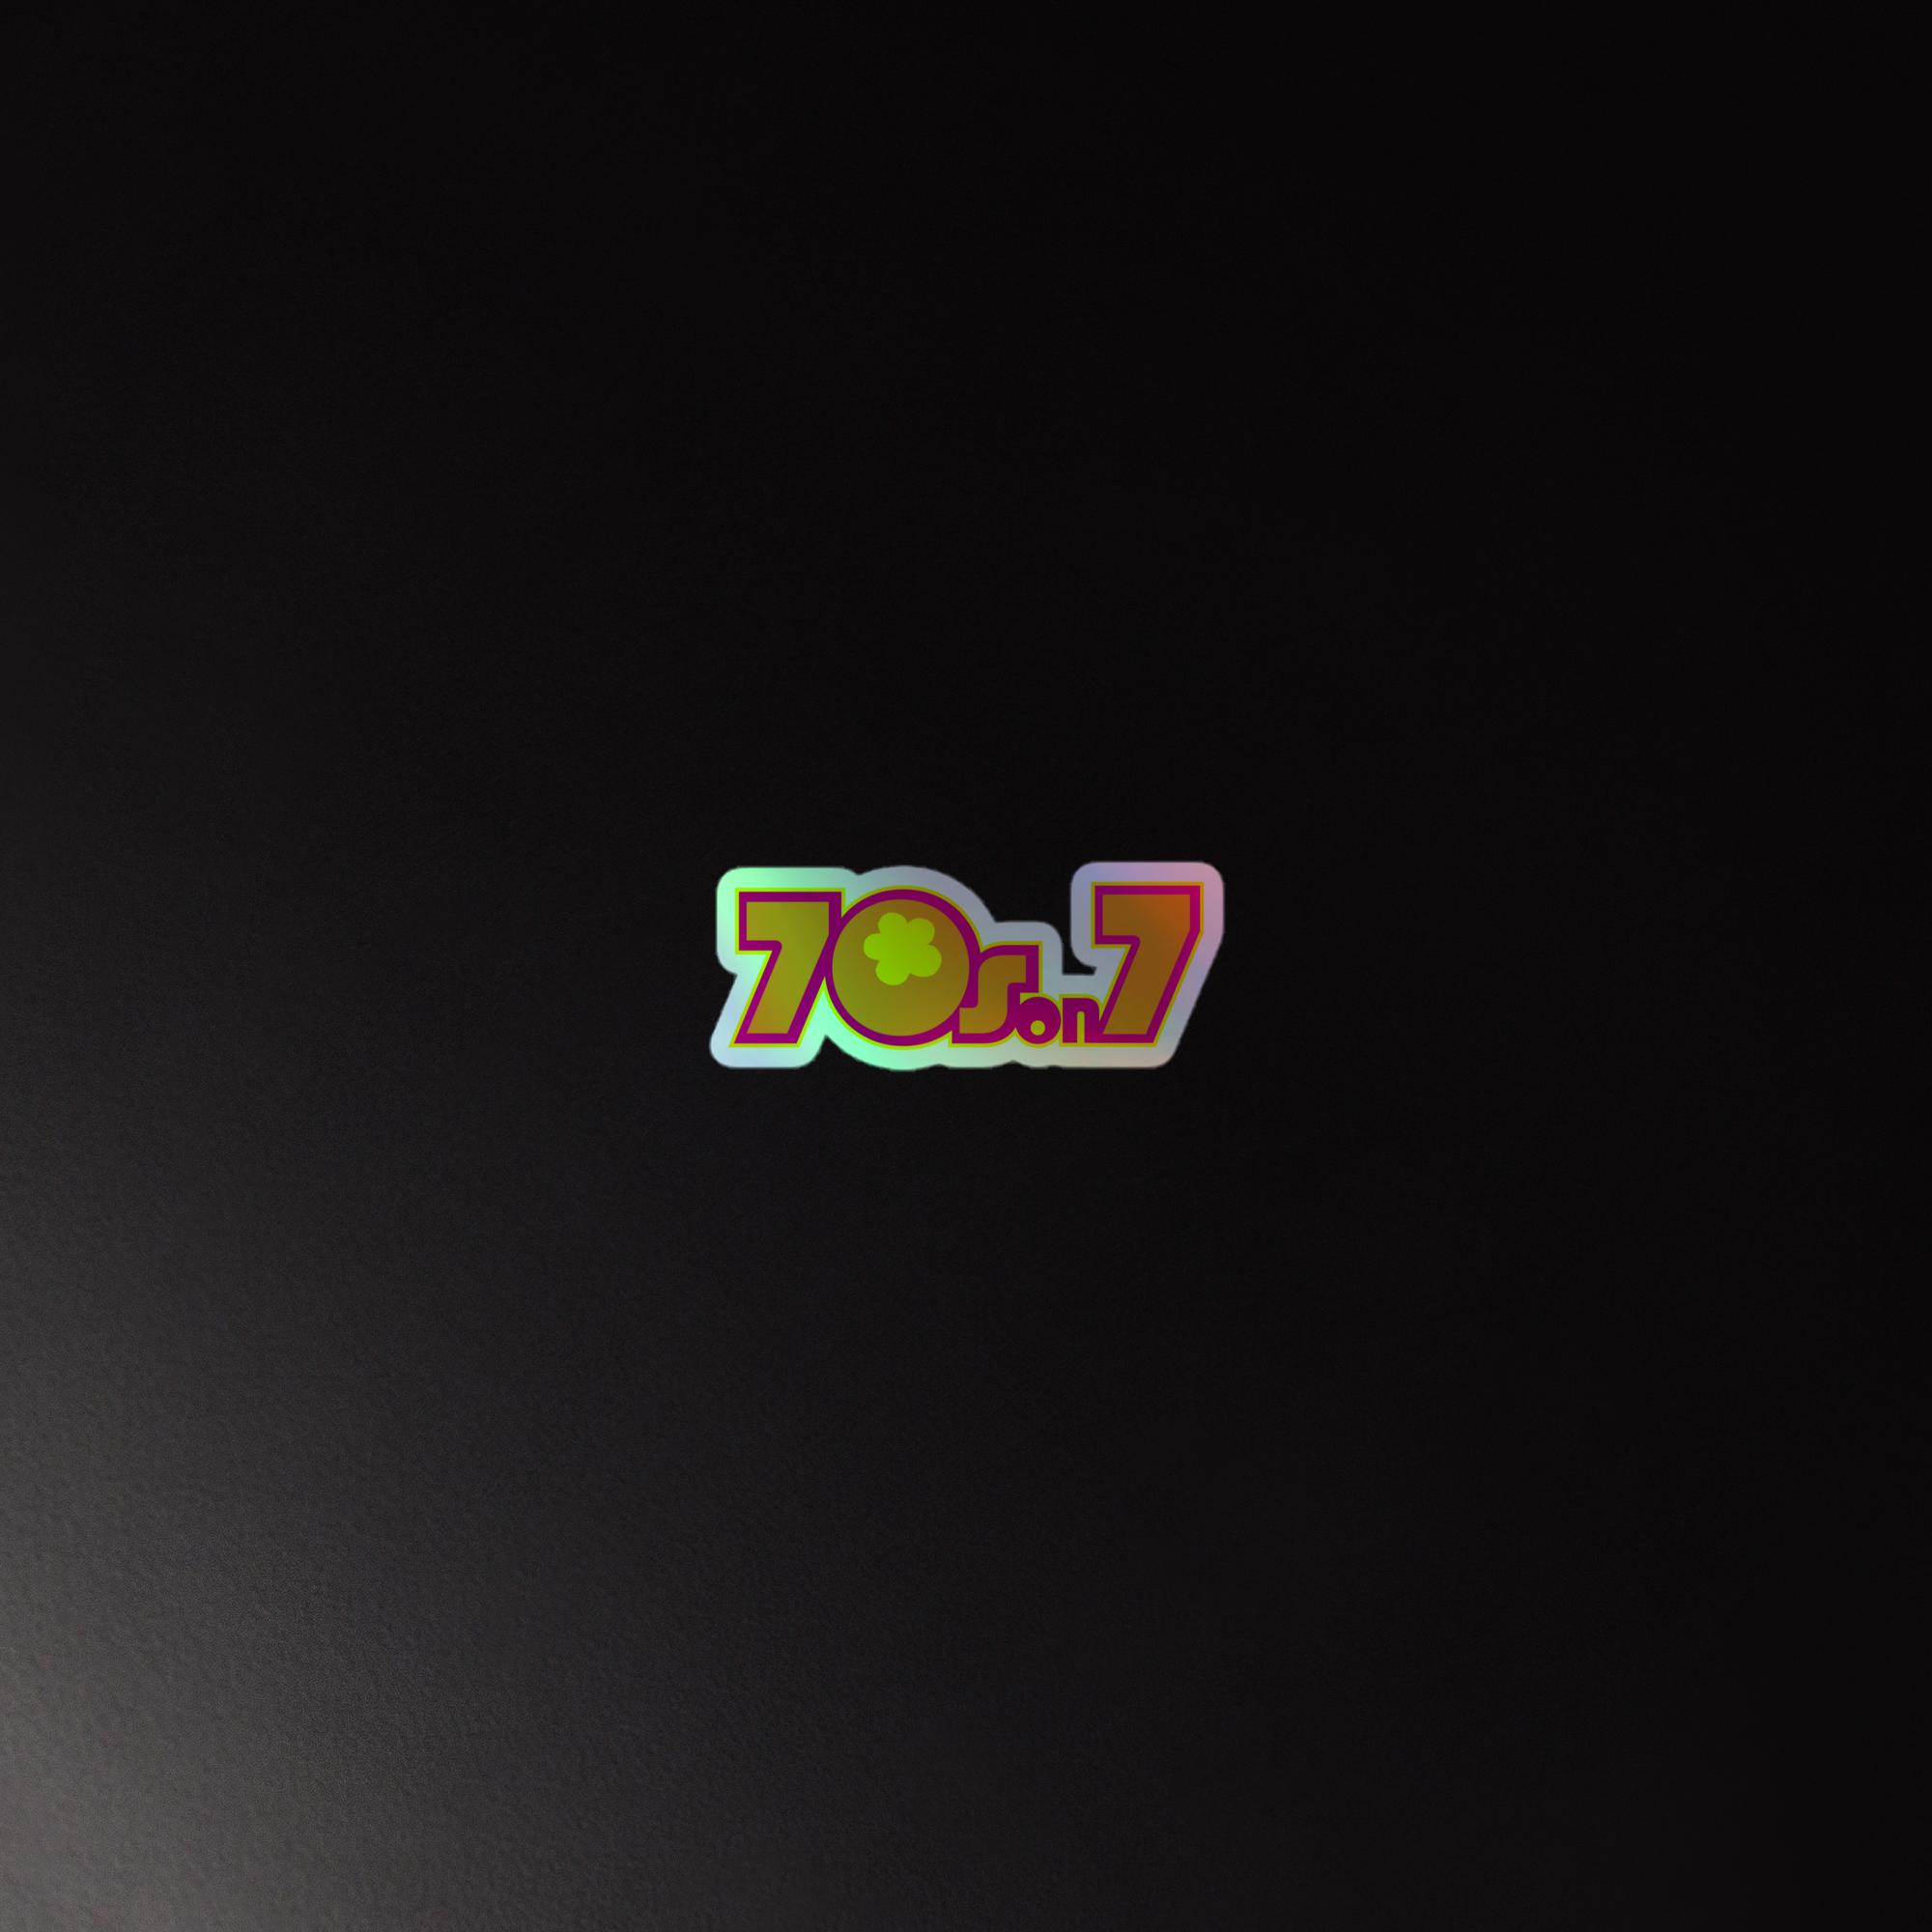 70s on 7: Holographic Sticker